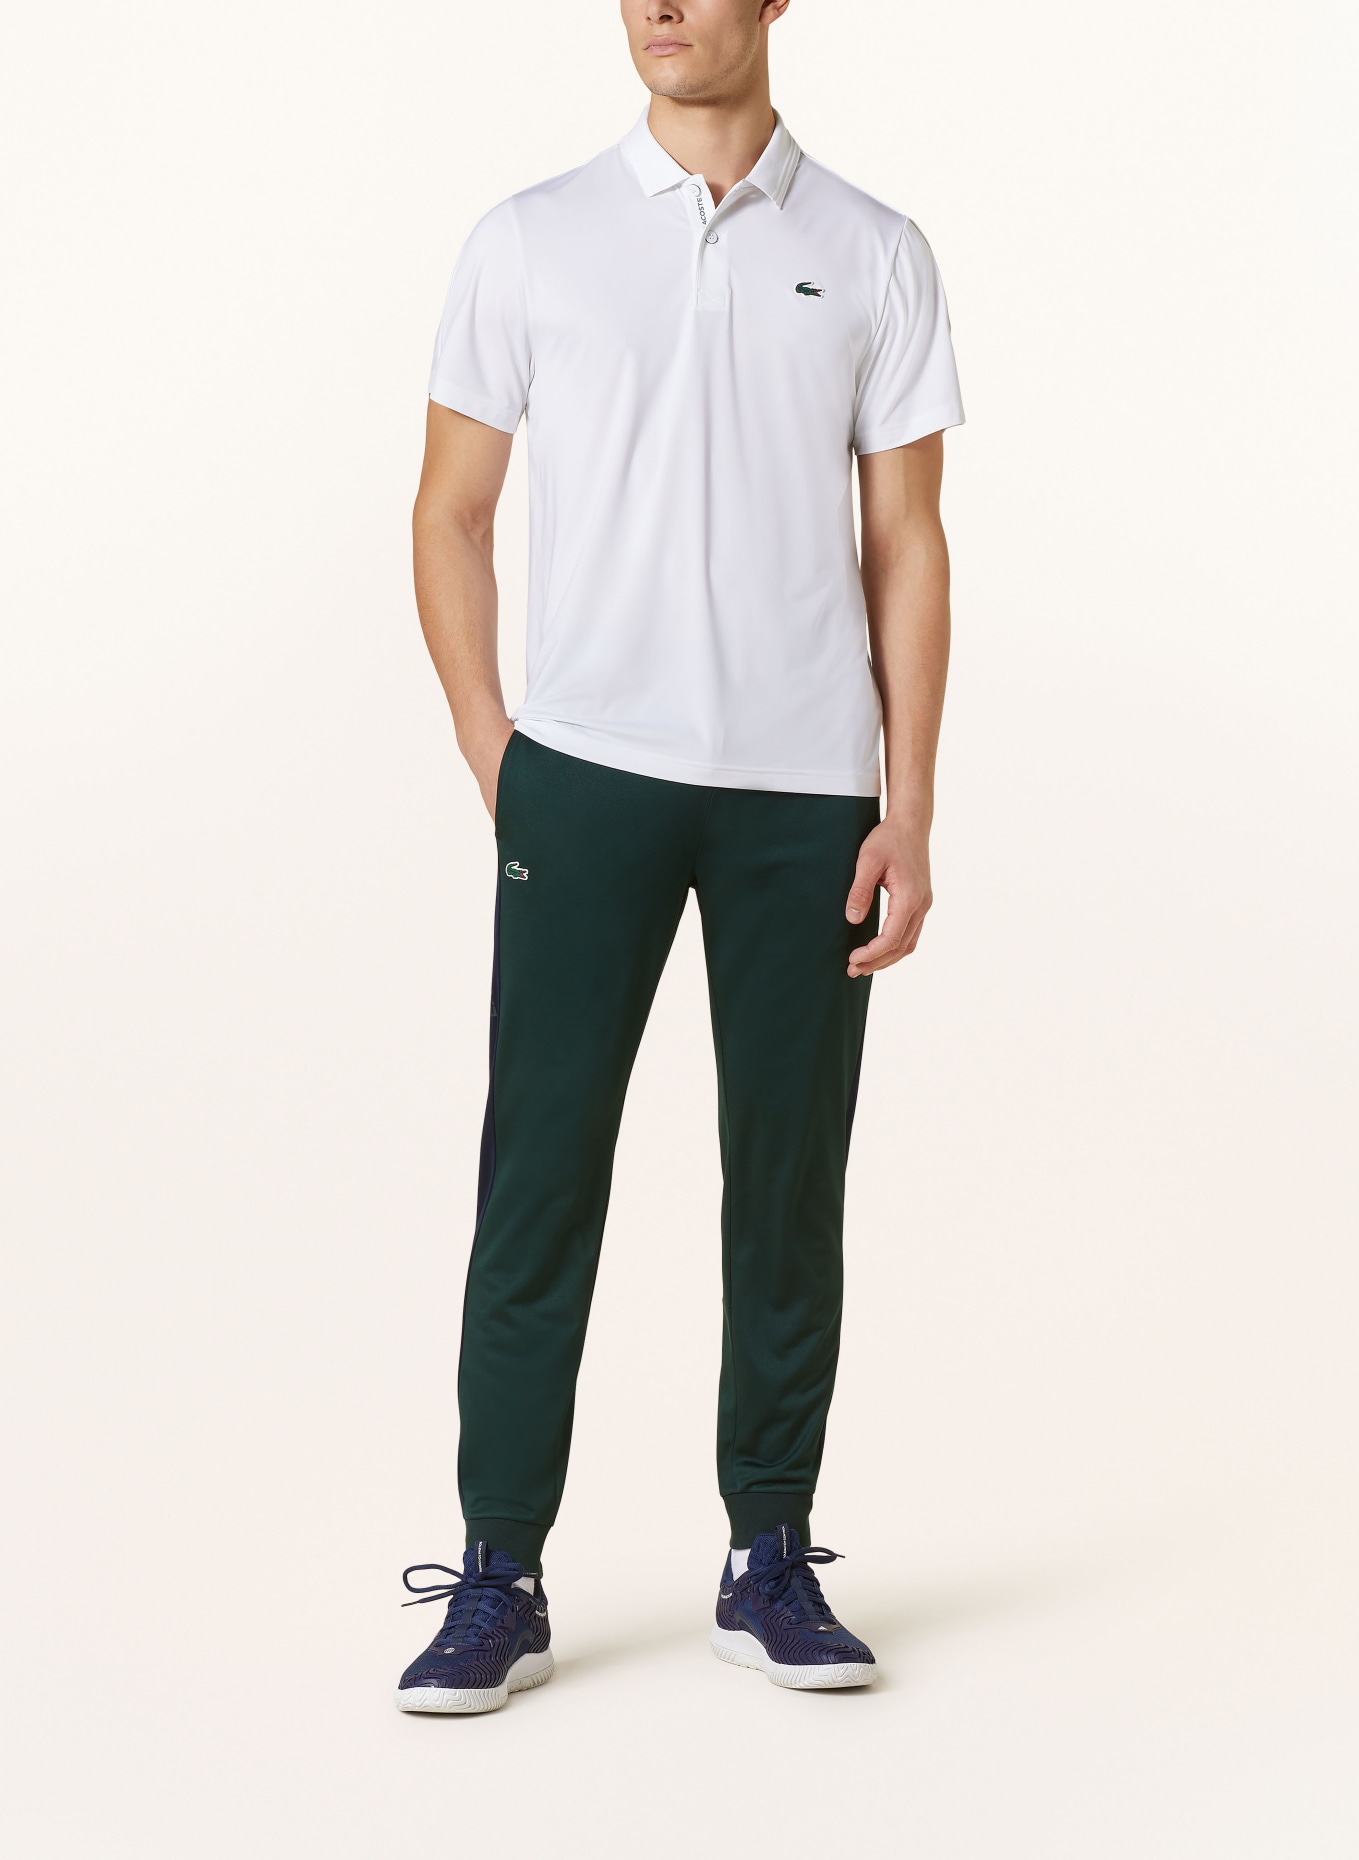 LACOSTE Funktions-Poloshirt, Farbe: WEISS (Bild 2)